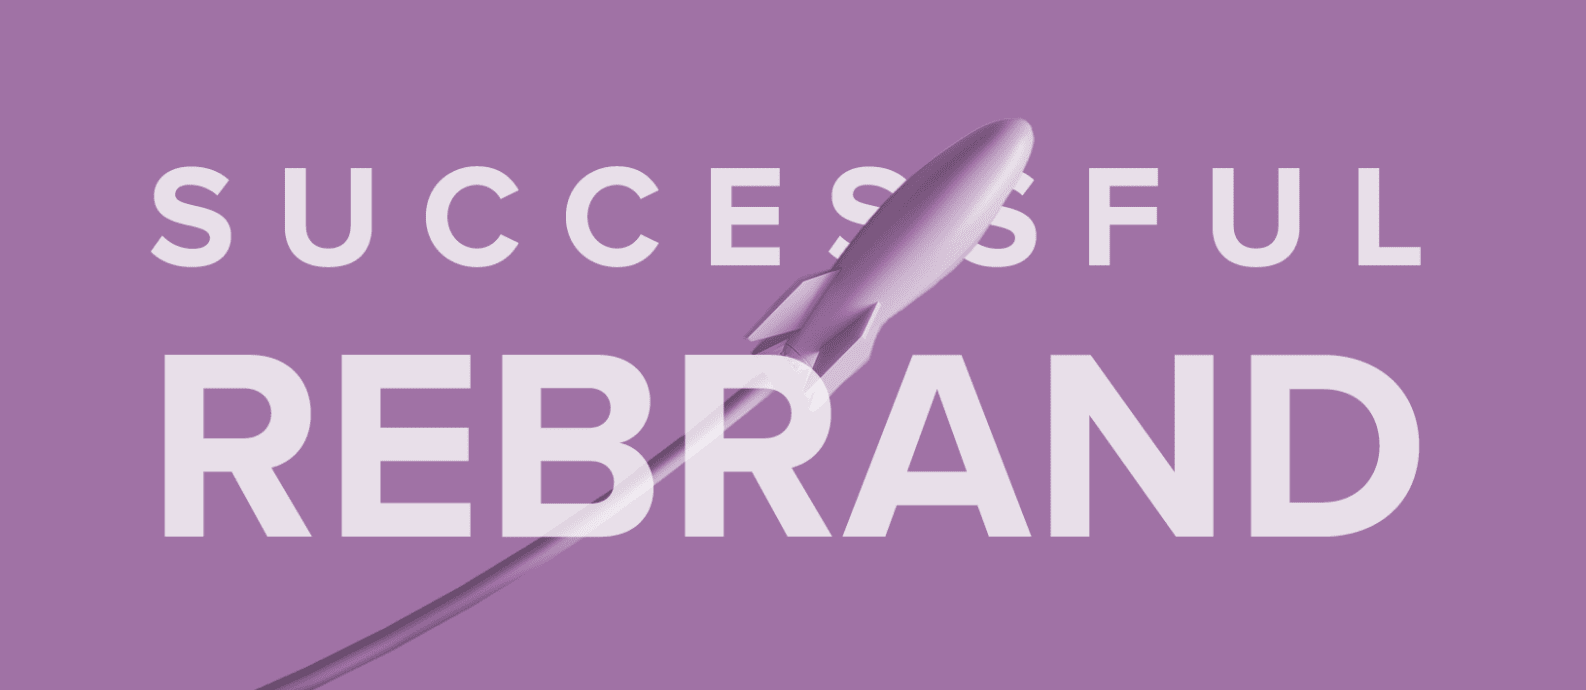 7 Steps Every CMO Should Follow for a Successful B2B Rebranding